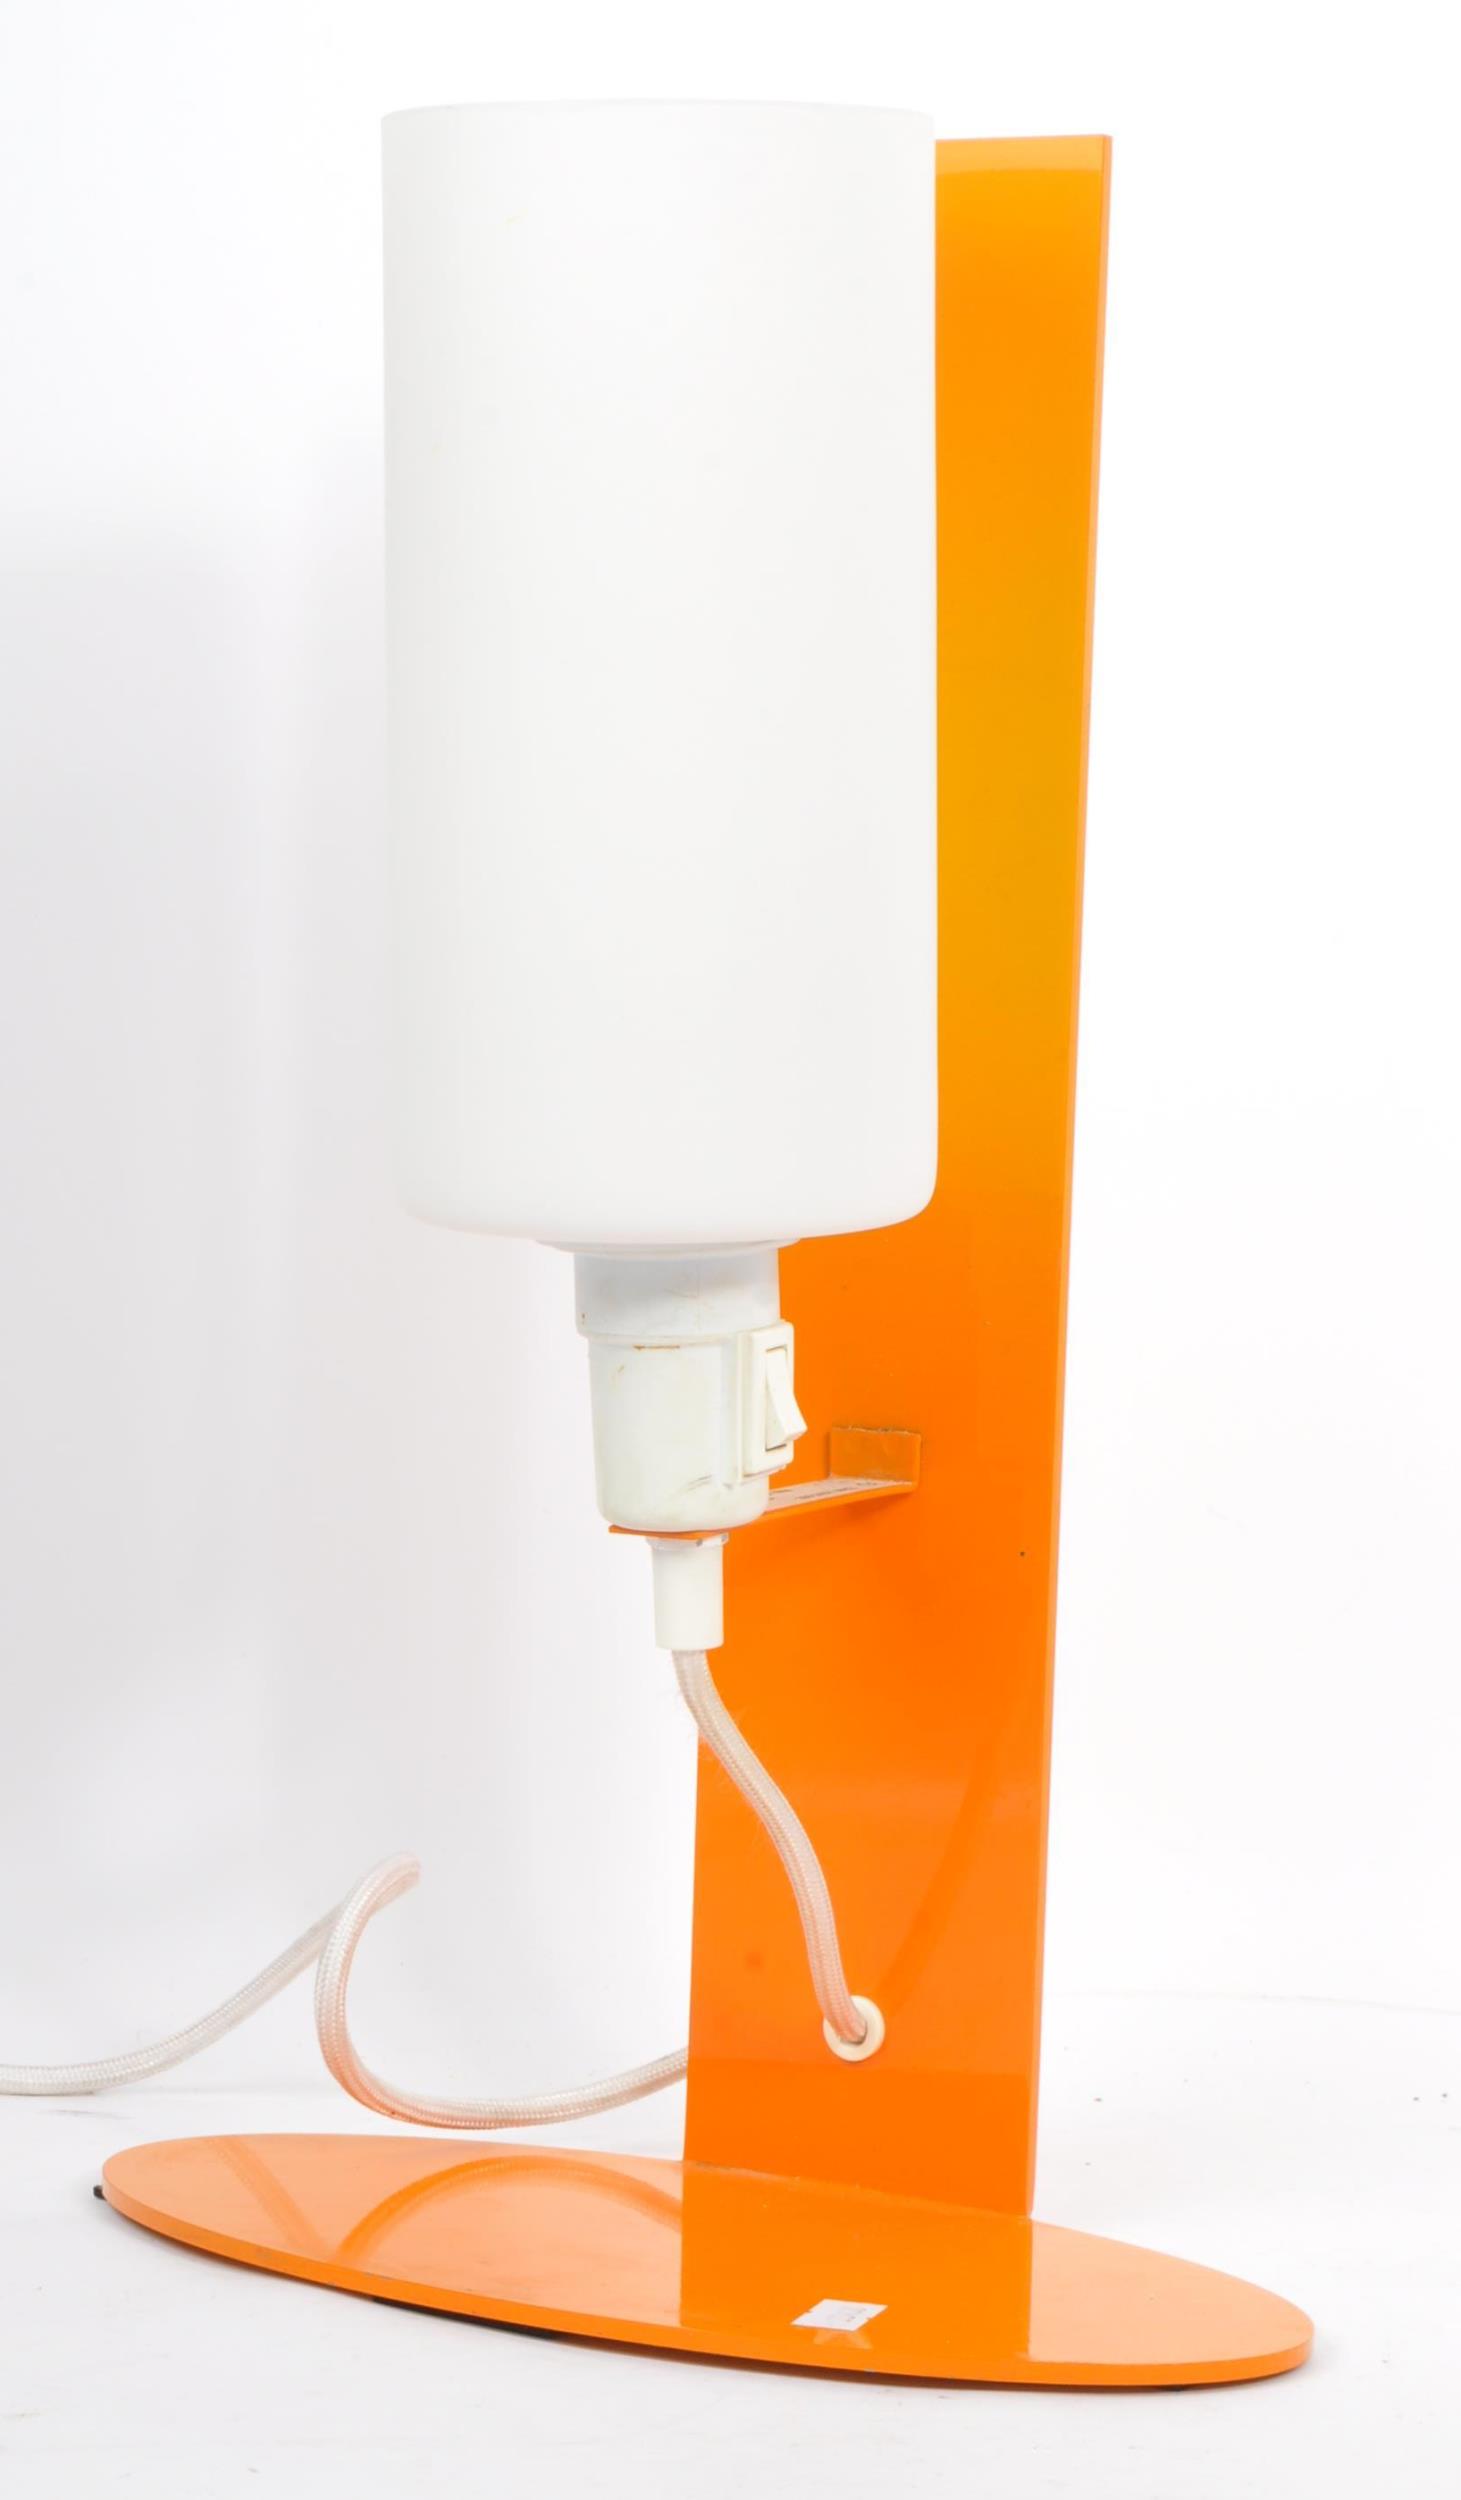 PAIR OF CONTEMPORARY ORANGE RETRO STYLE TABLE LAMPS - Image 5 of 7